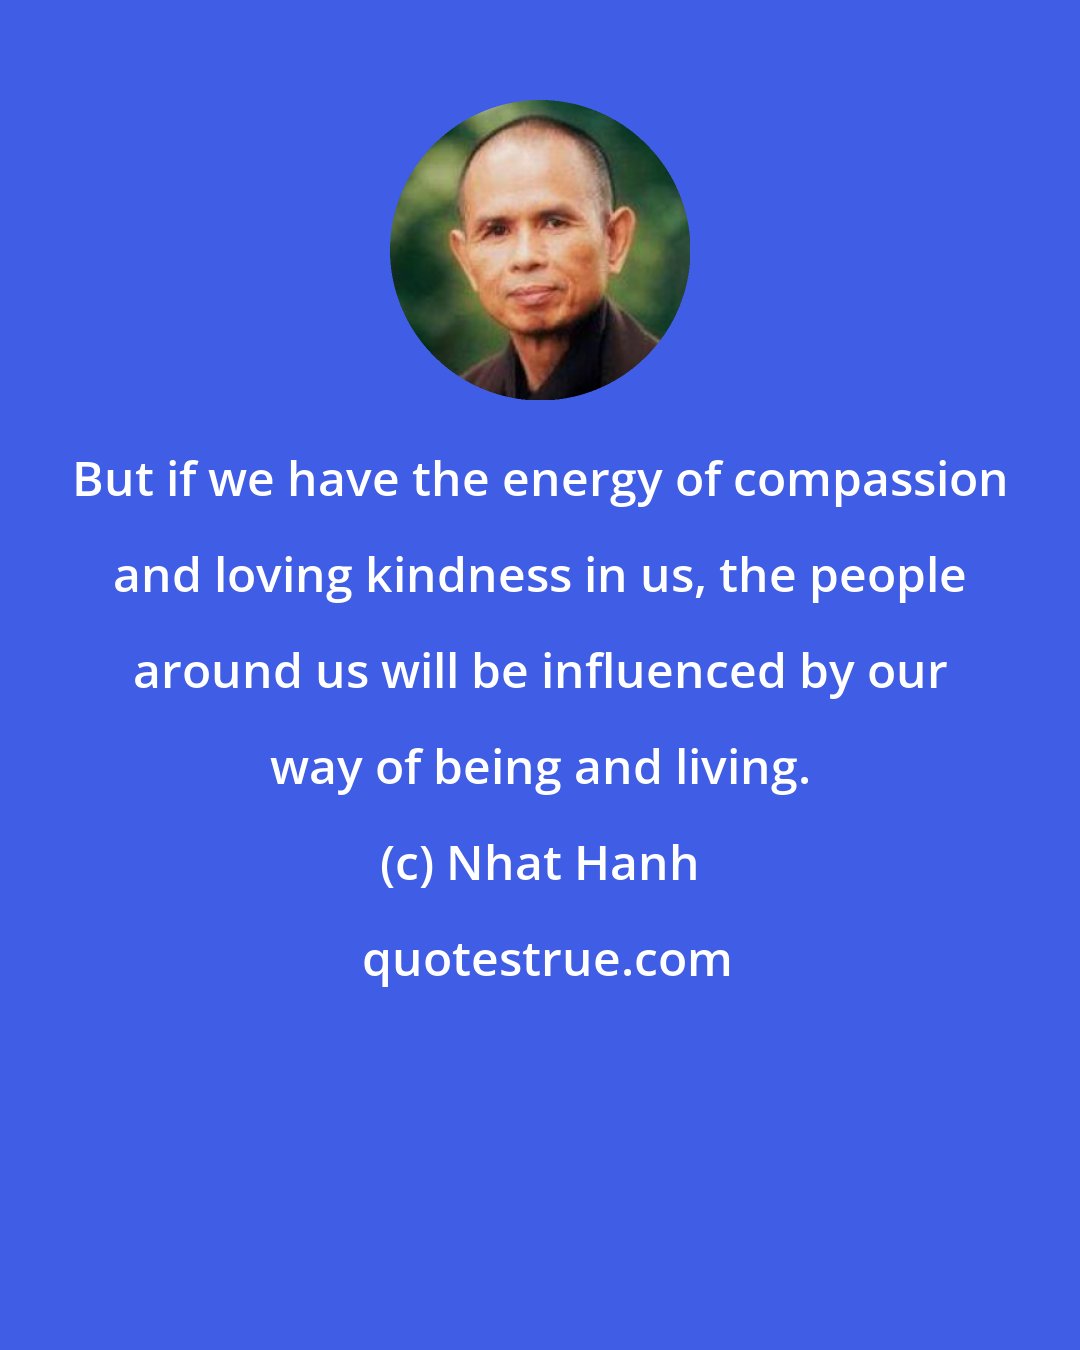 Nhat Hanh: But if we have the energy of compassion and loving kindness in us, the people around us will be influenced by our way of being and living.